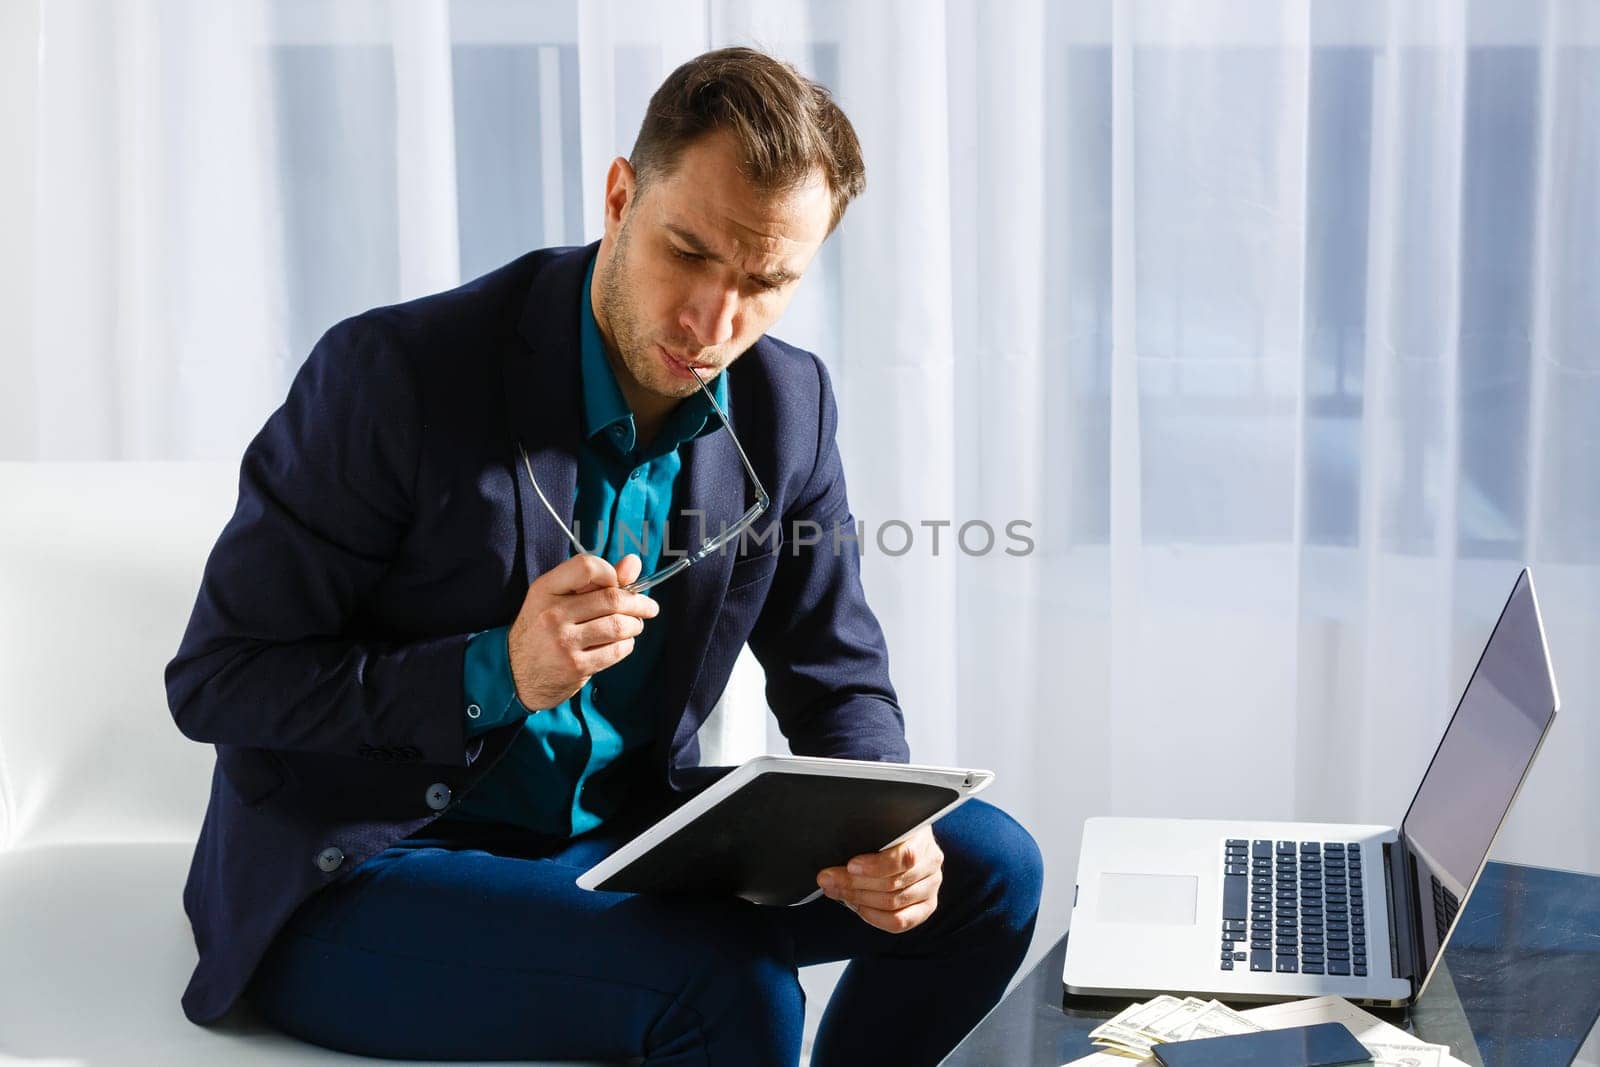 Business man working at office with laptop and documents on his desk, consultant lawyer concept